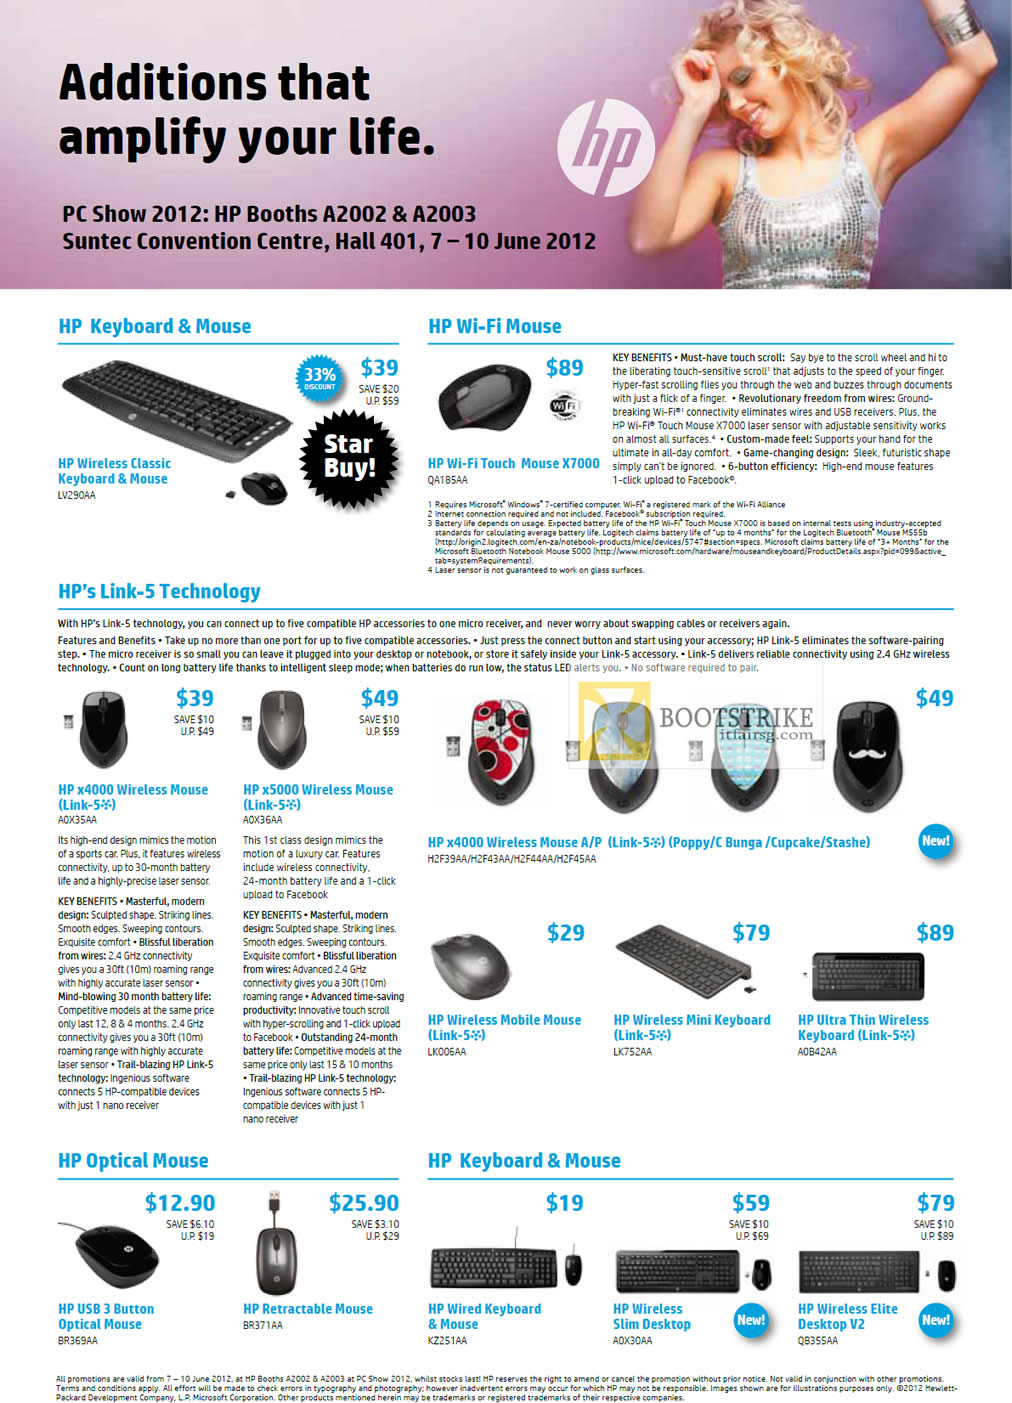 PC SHOW 2012 price list image brochure of HP Accessories Keyboard, Mouse, Wi-Fi Mouse X7000, X4000, X5000, Optical Mouse, Link-5